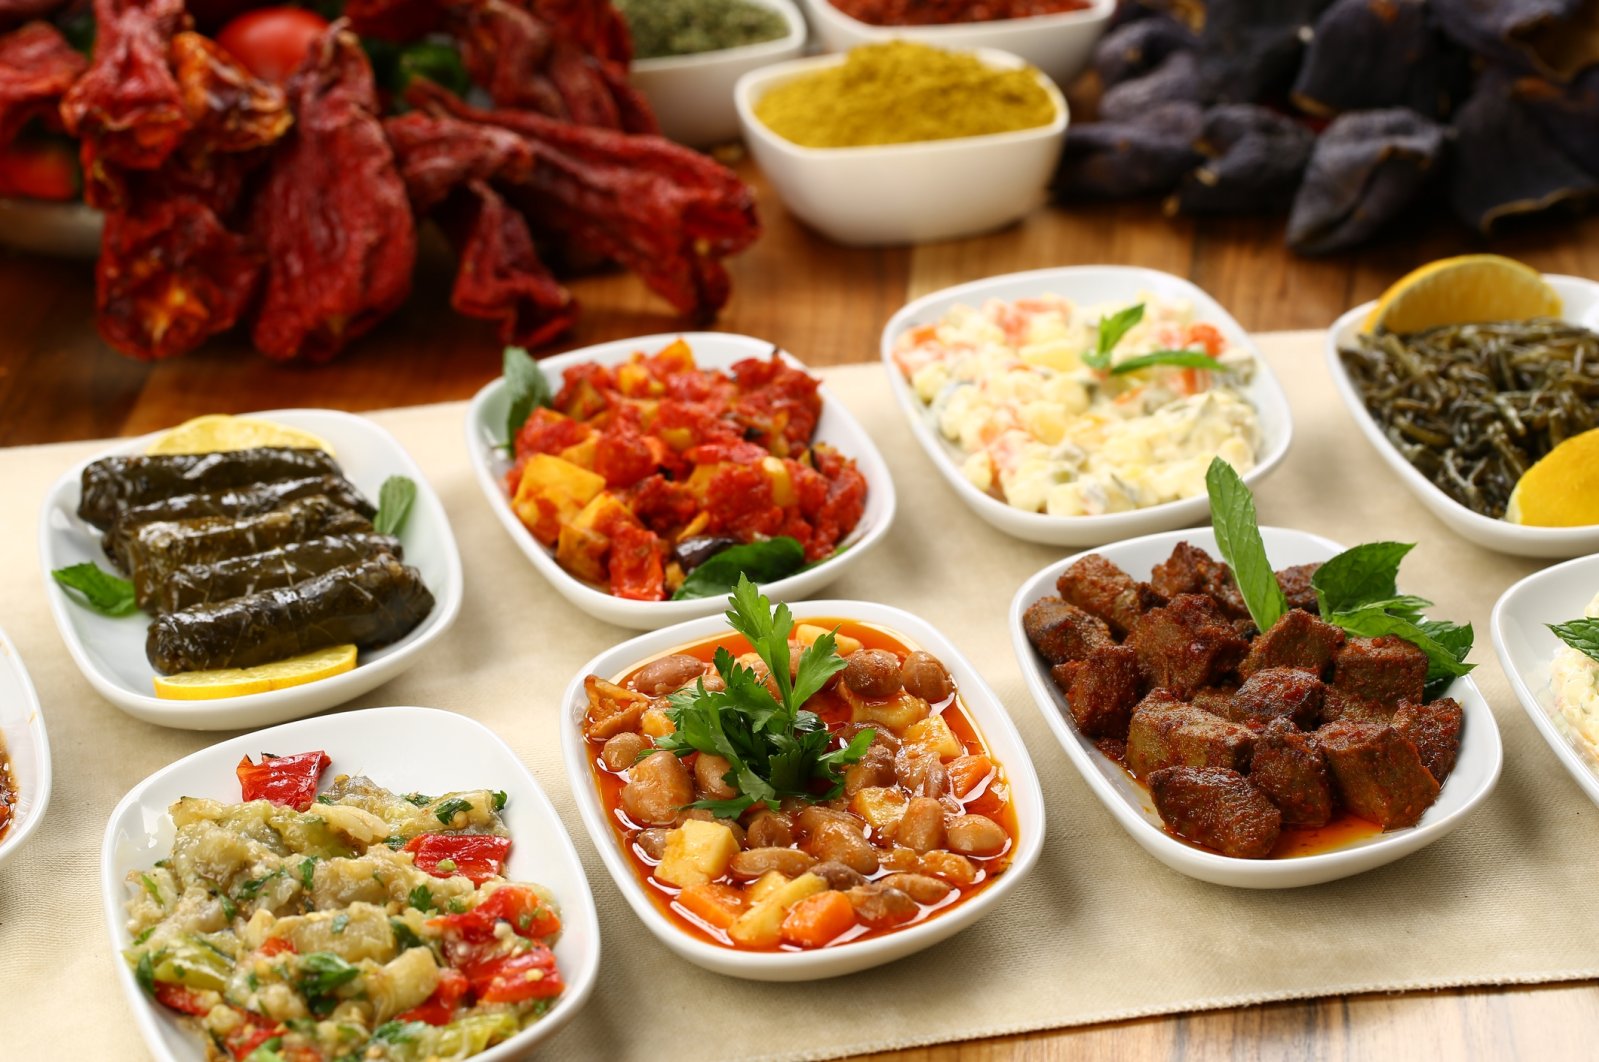 Mezes perfectly represent Turkish cuisine and food culture. (iStock Photo)